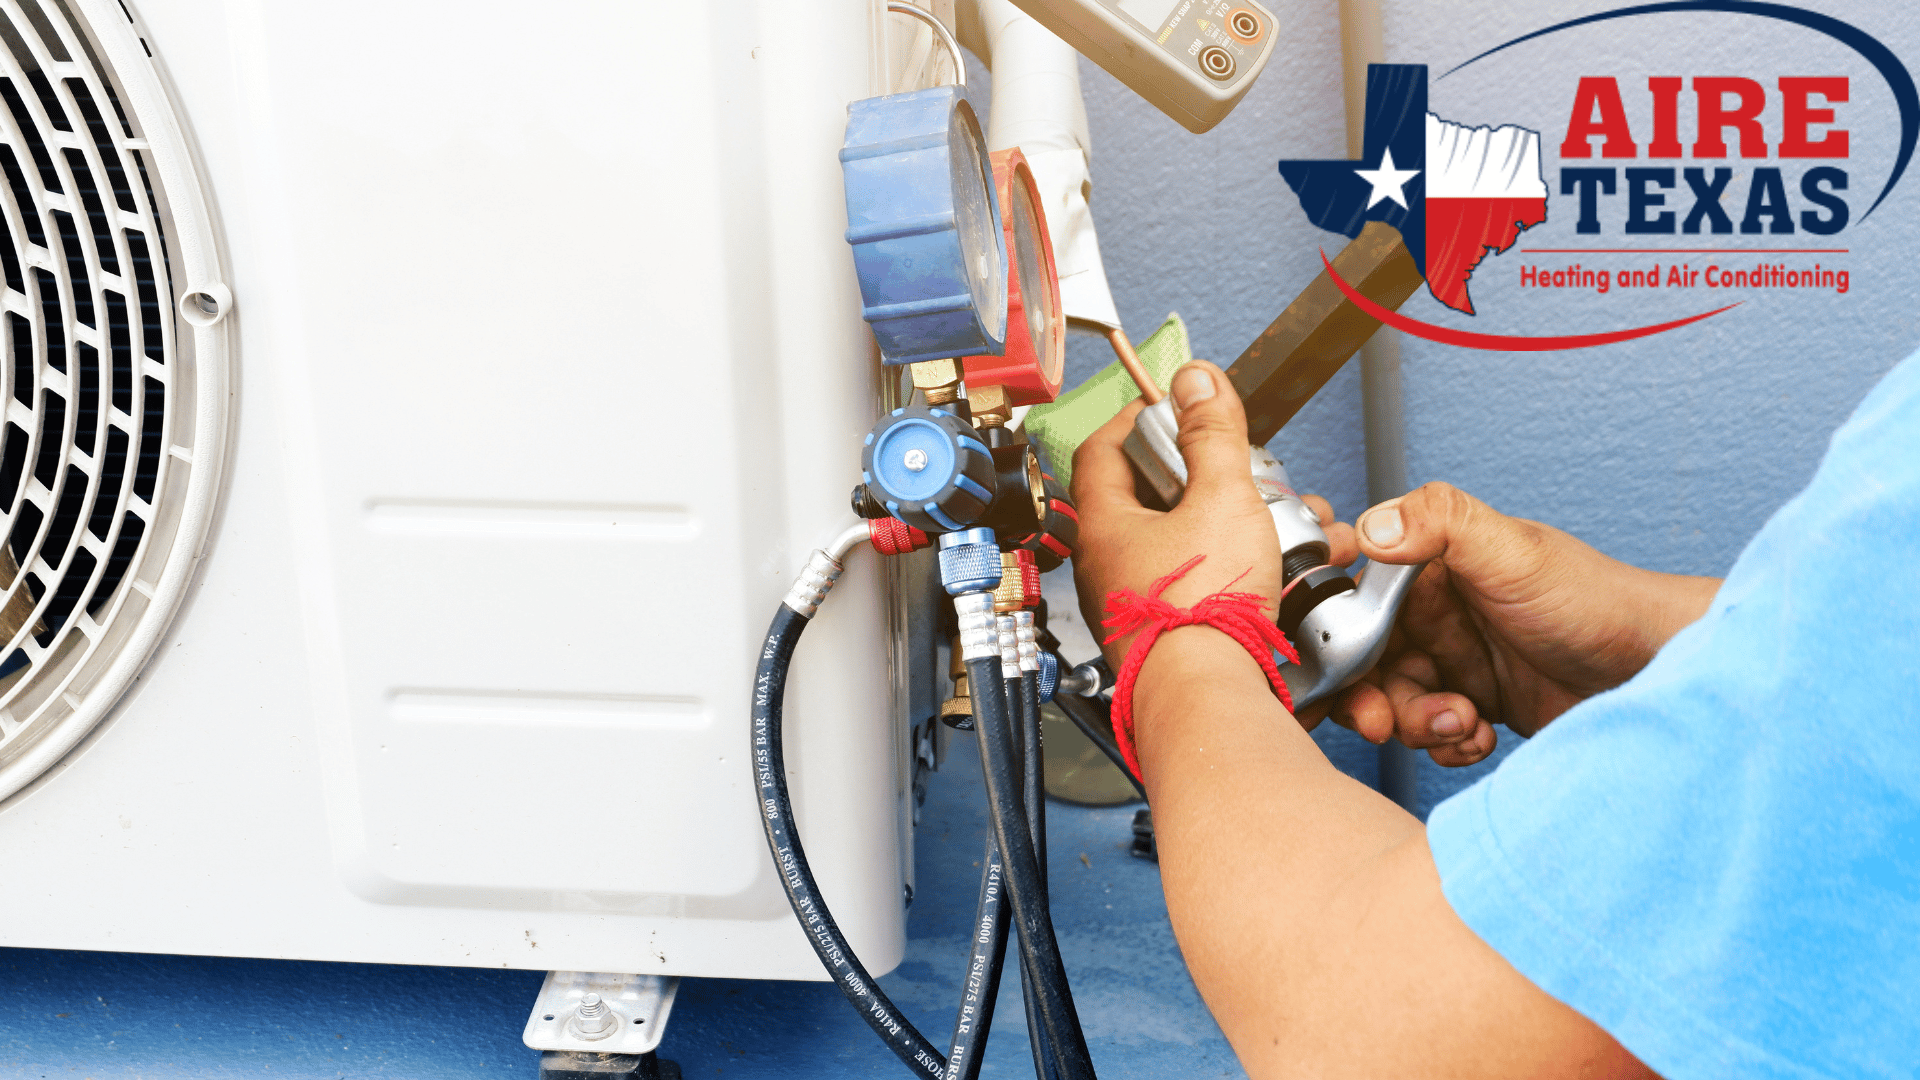 Air Conditioning Repair Services in Plano, TX